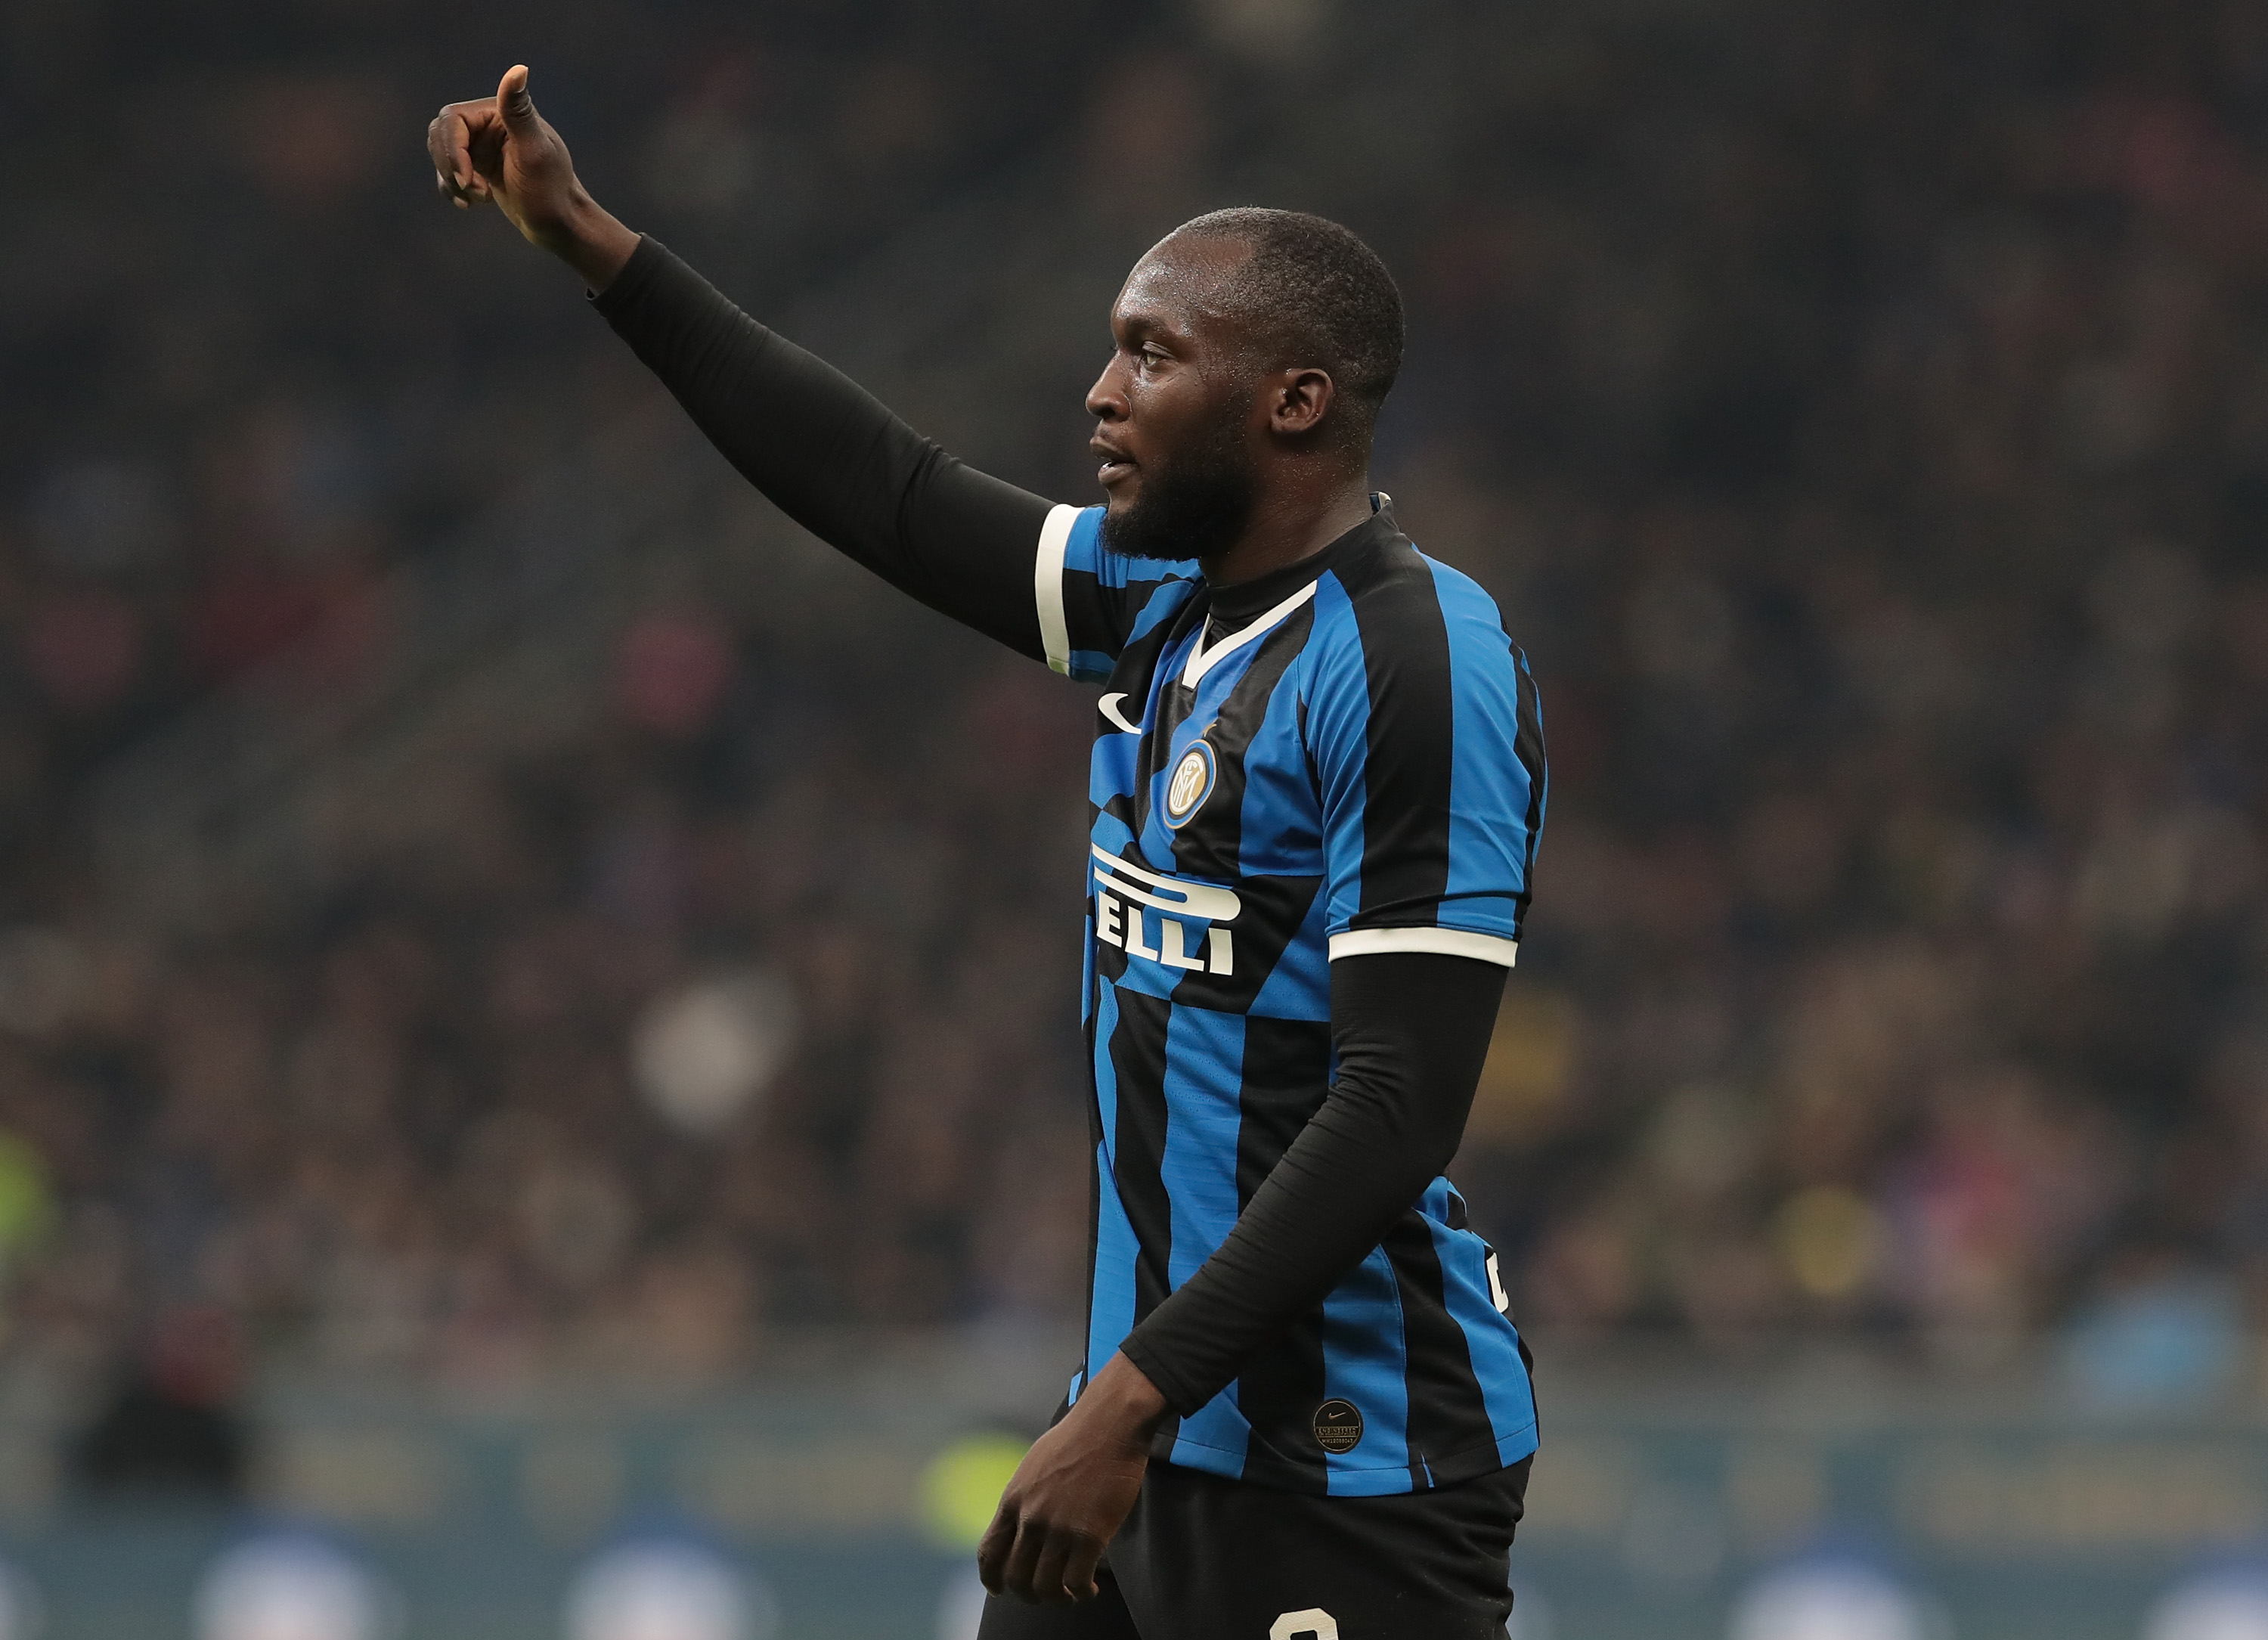 The hero returns to Inter Milan. (Photo by Emilio Andreoli/Getty Images)